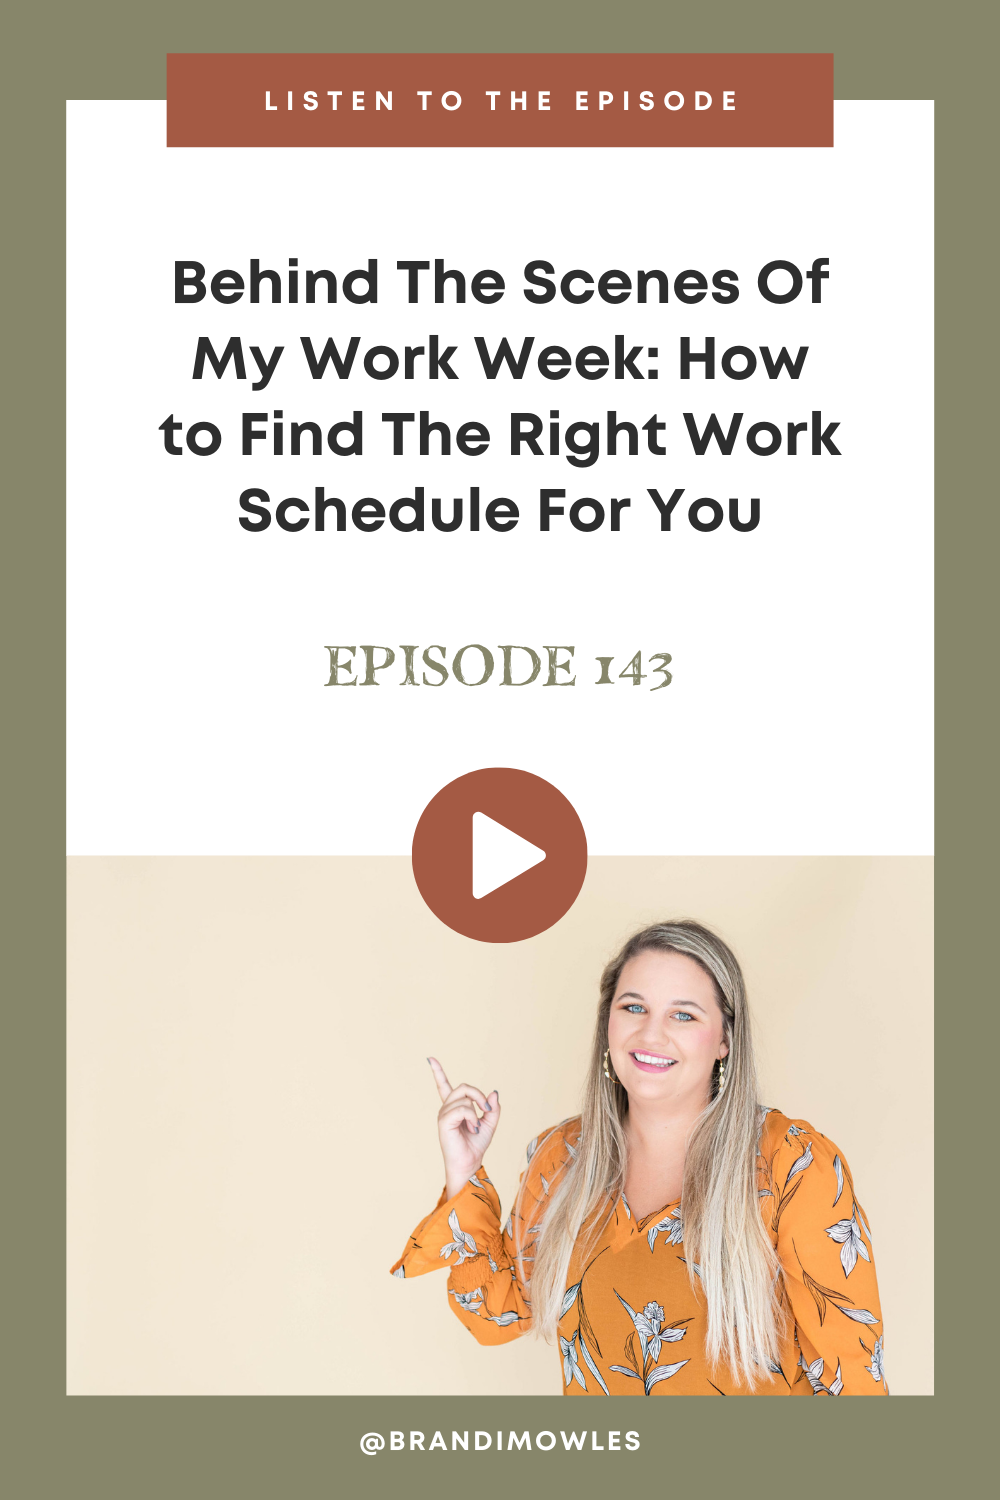 Brandi Mowles podcast episode feature about scheduling your work week